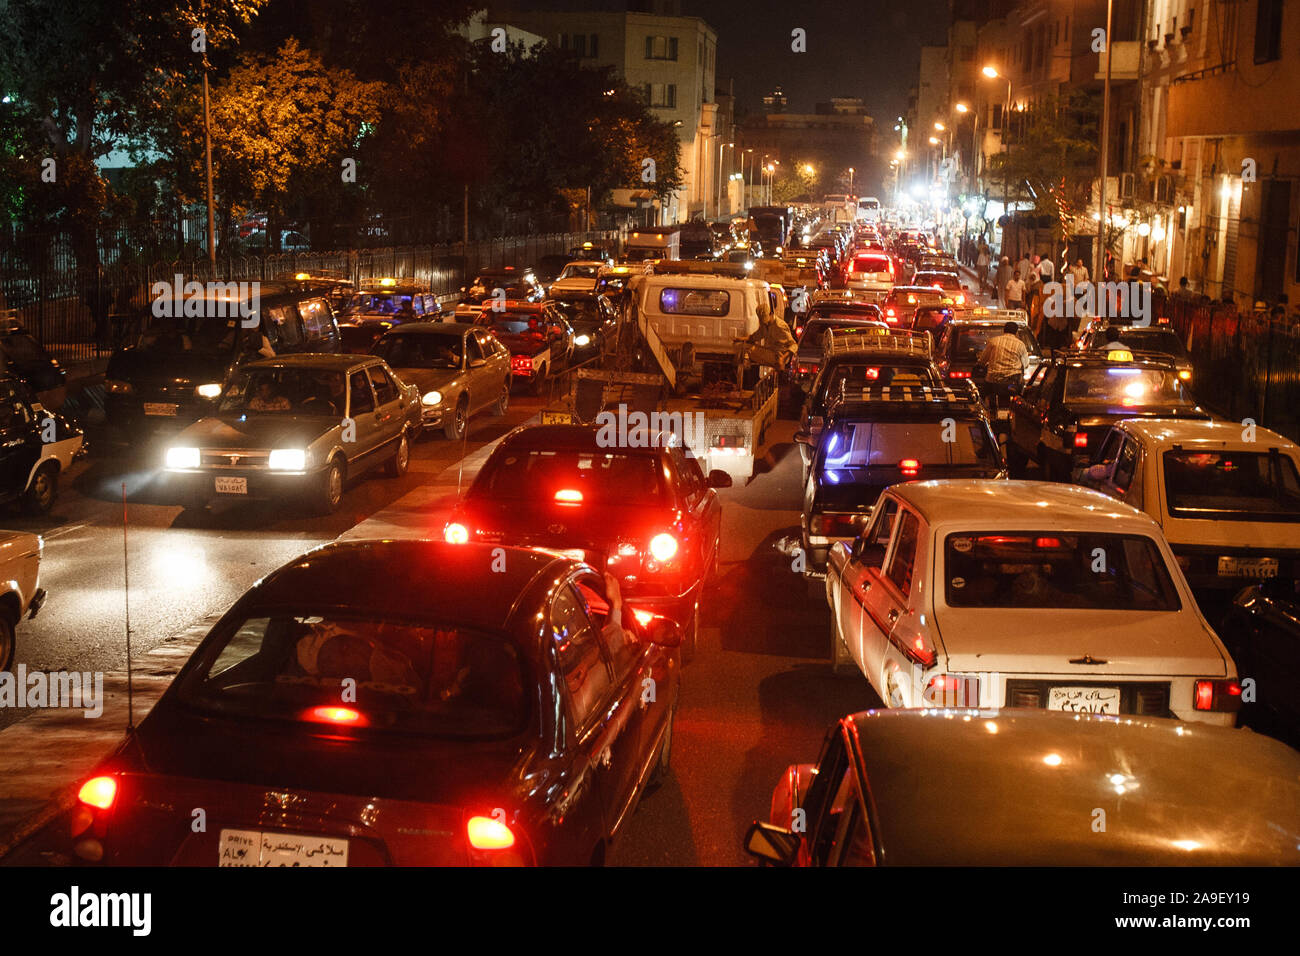 Cairo, Egypt, May 2, 2008: An evening traffic jam in the streets of Cairo. Stock Photo